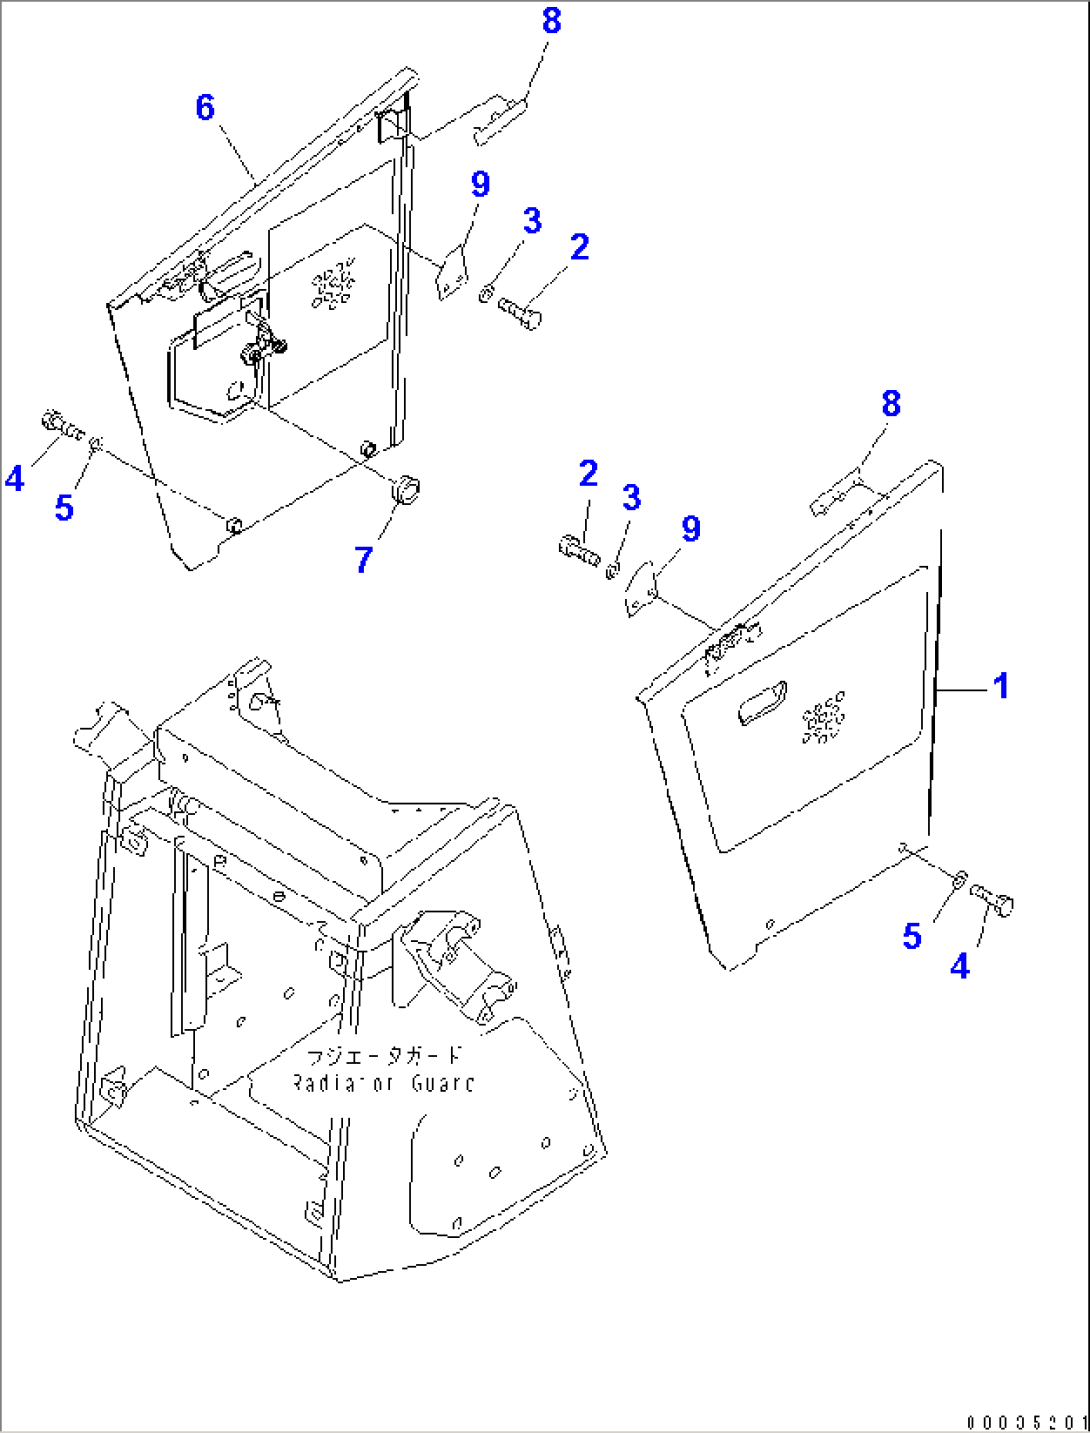 ENGINE SIDE COVER (FOR ANGLE DOZER) (EXCEPT JAPAN)